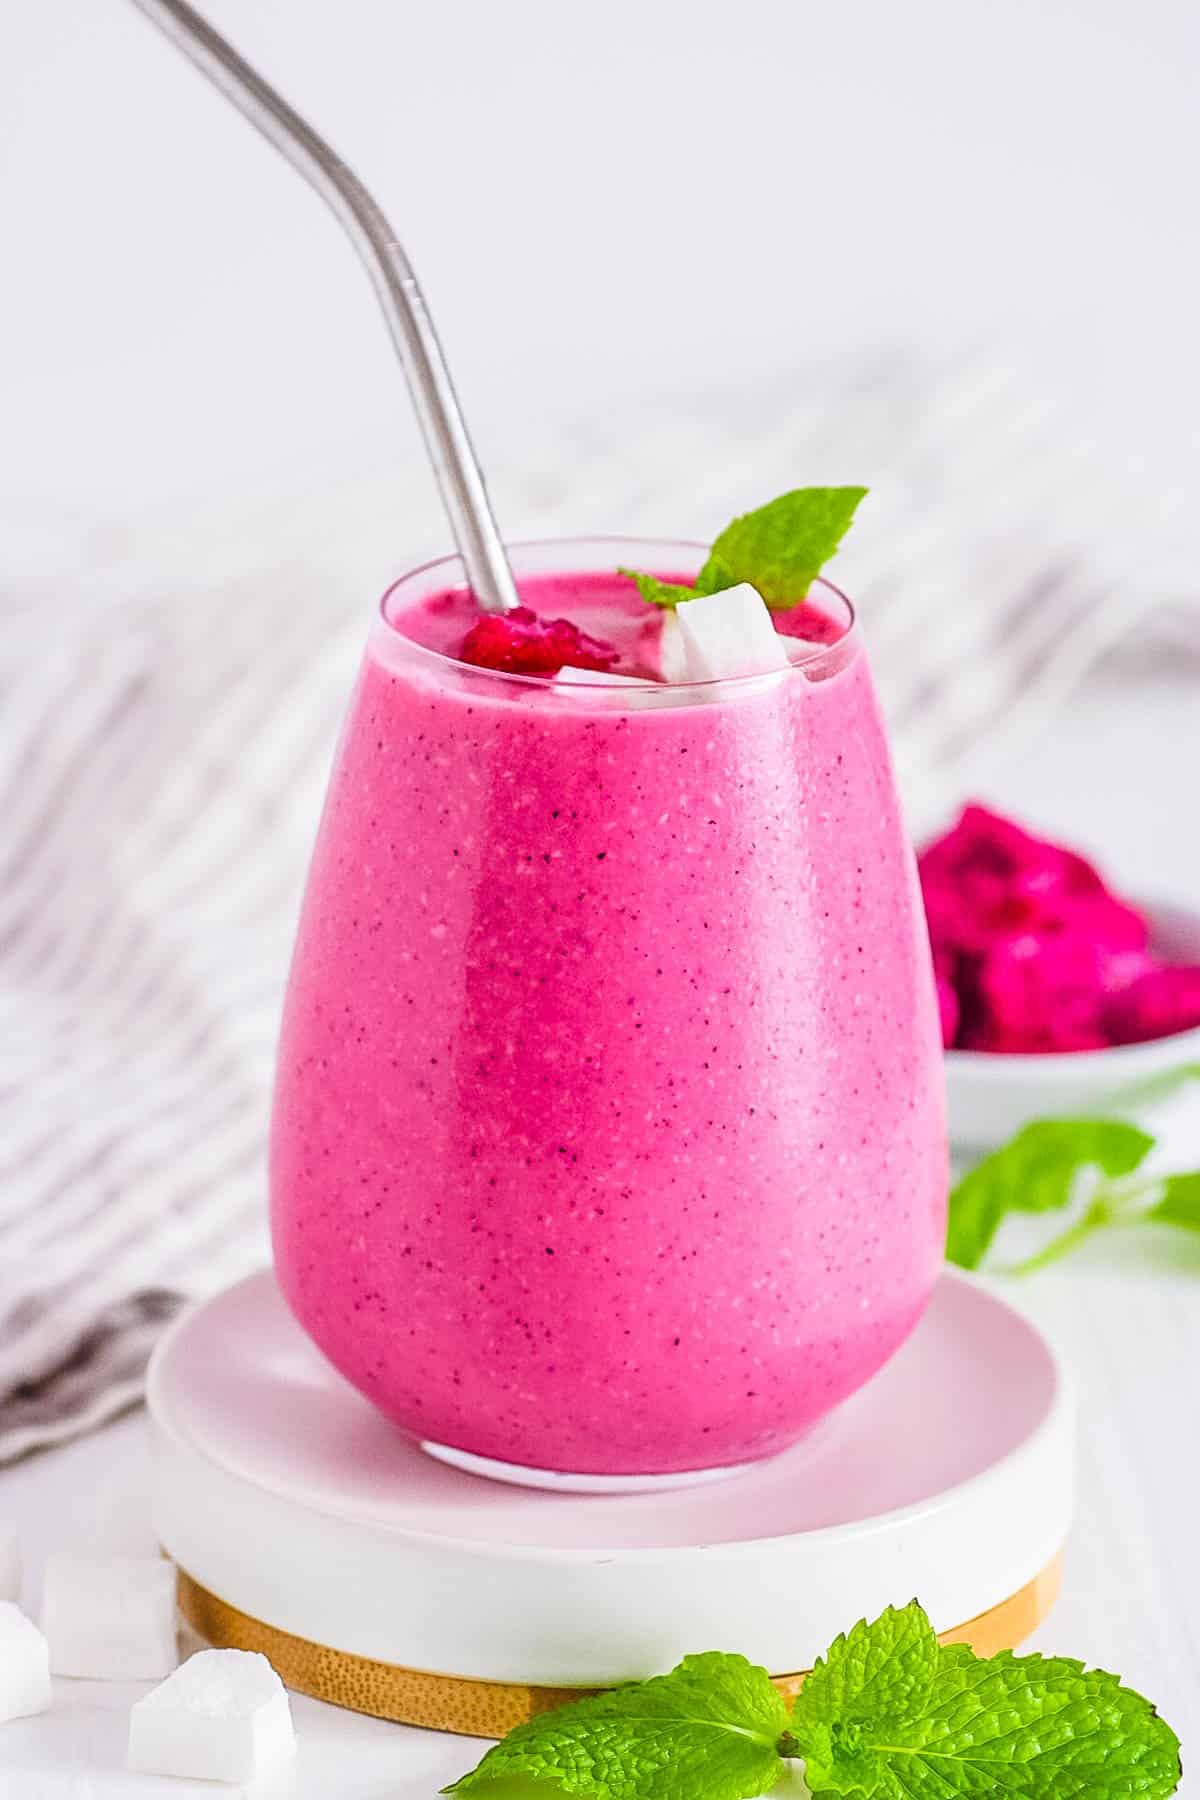 easy healthy dragon fruit smoothie recipe with banana and mango in a glass